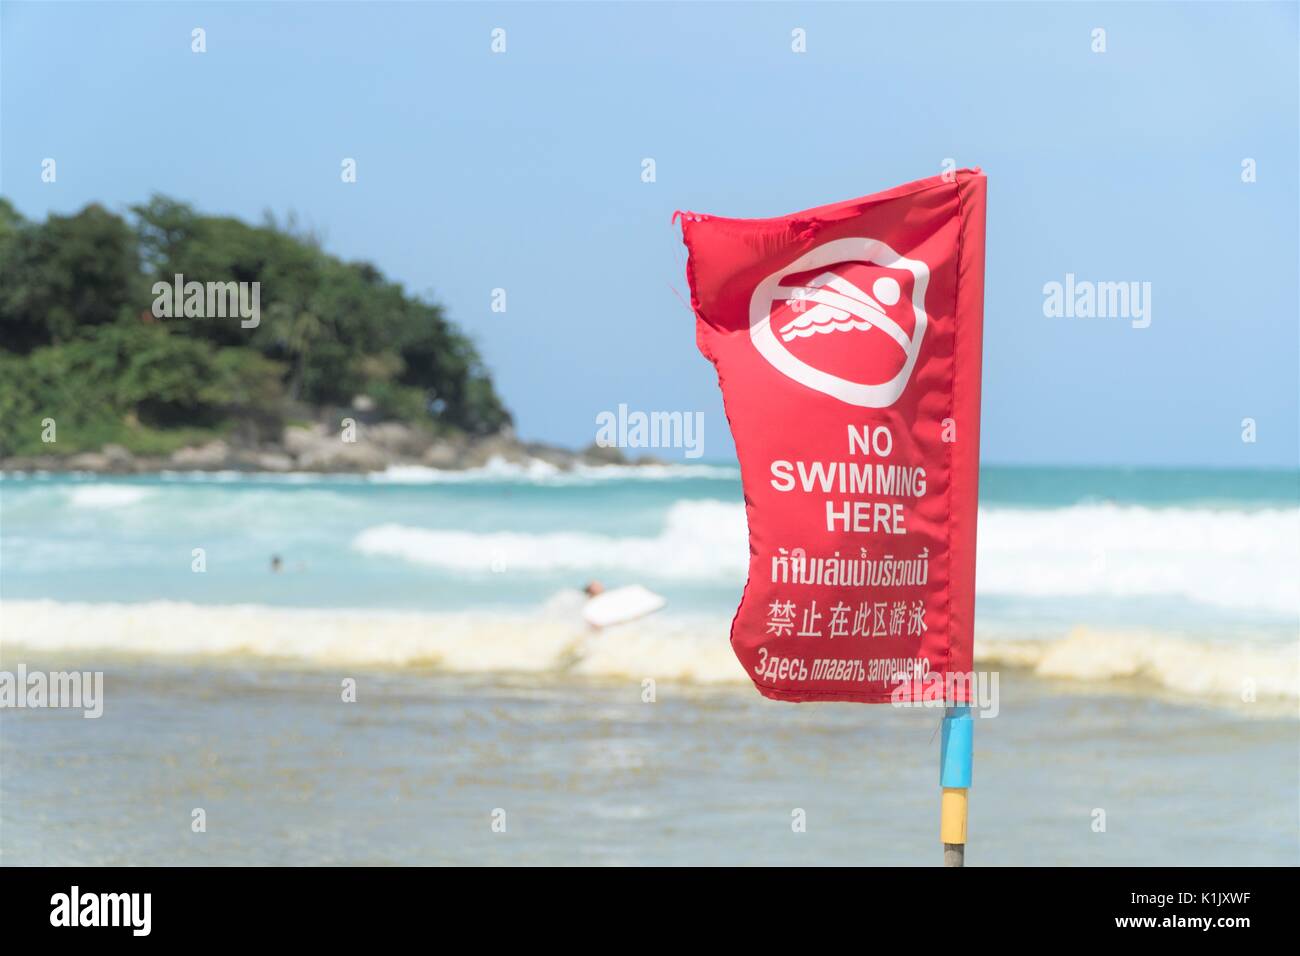 No swimming here sign dangerous area of the beach red flag in English and Thai text Stock Photo